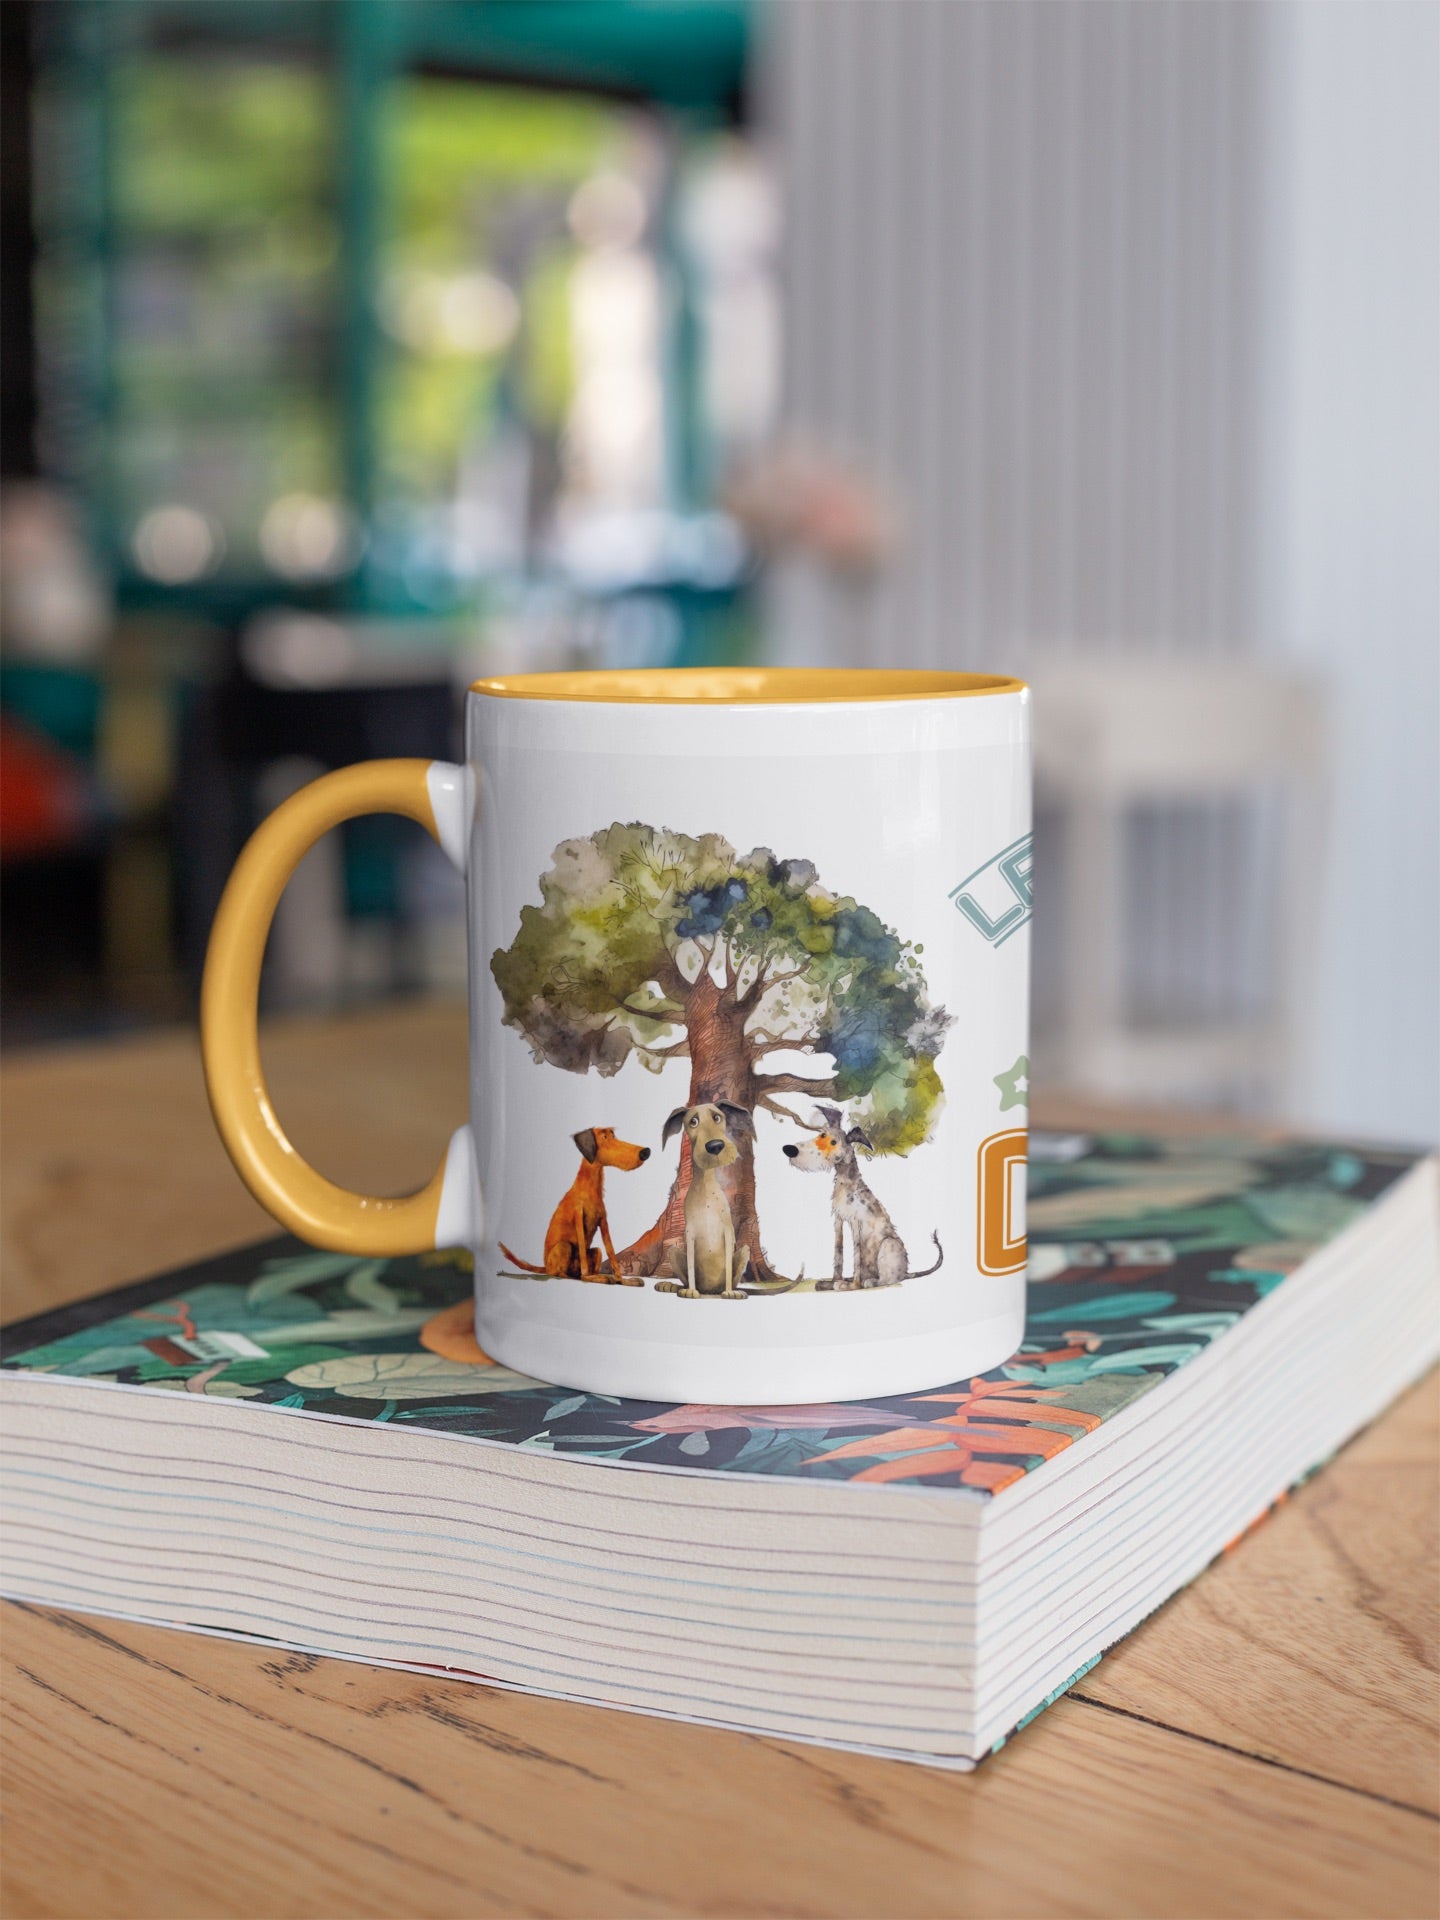 Less People, More Dogs Comic Collection Art Personalised Ceramic Mug Gift Idea